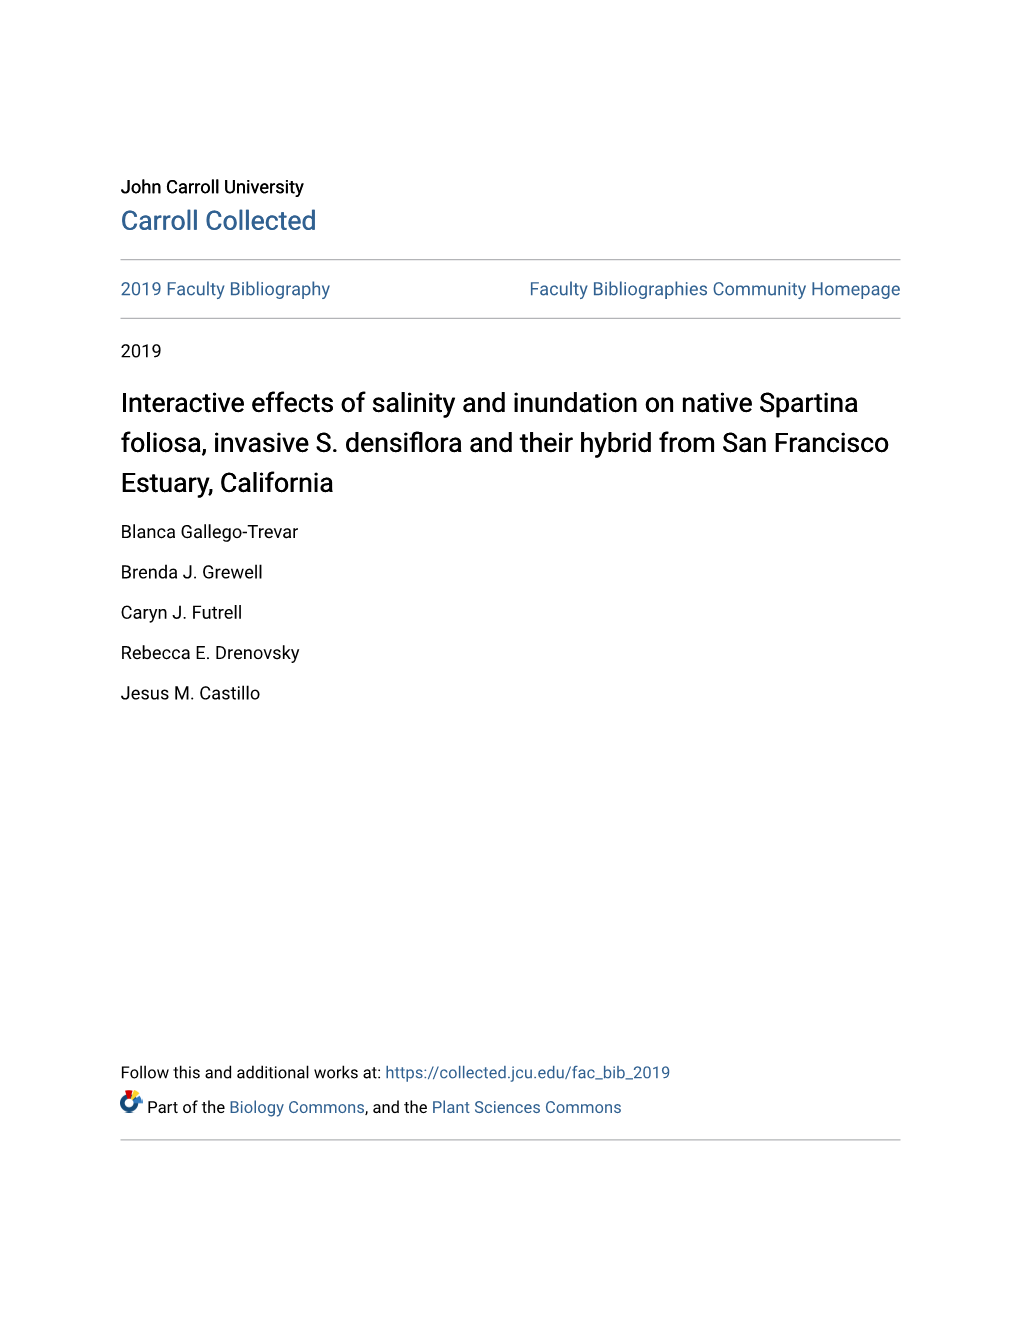 Interactive Effects of Salinity and Inundation on Native Spartina Foliosa, Invasive S. Densiflora and Their Hybrid from San Francisco Estuary, California